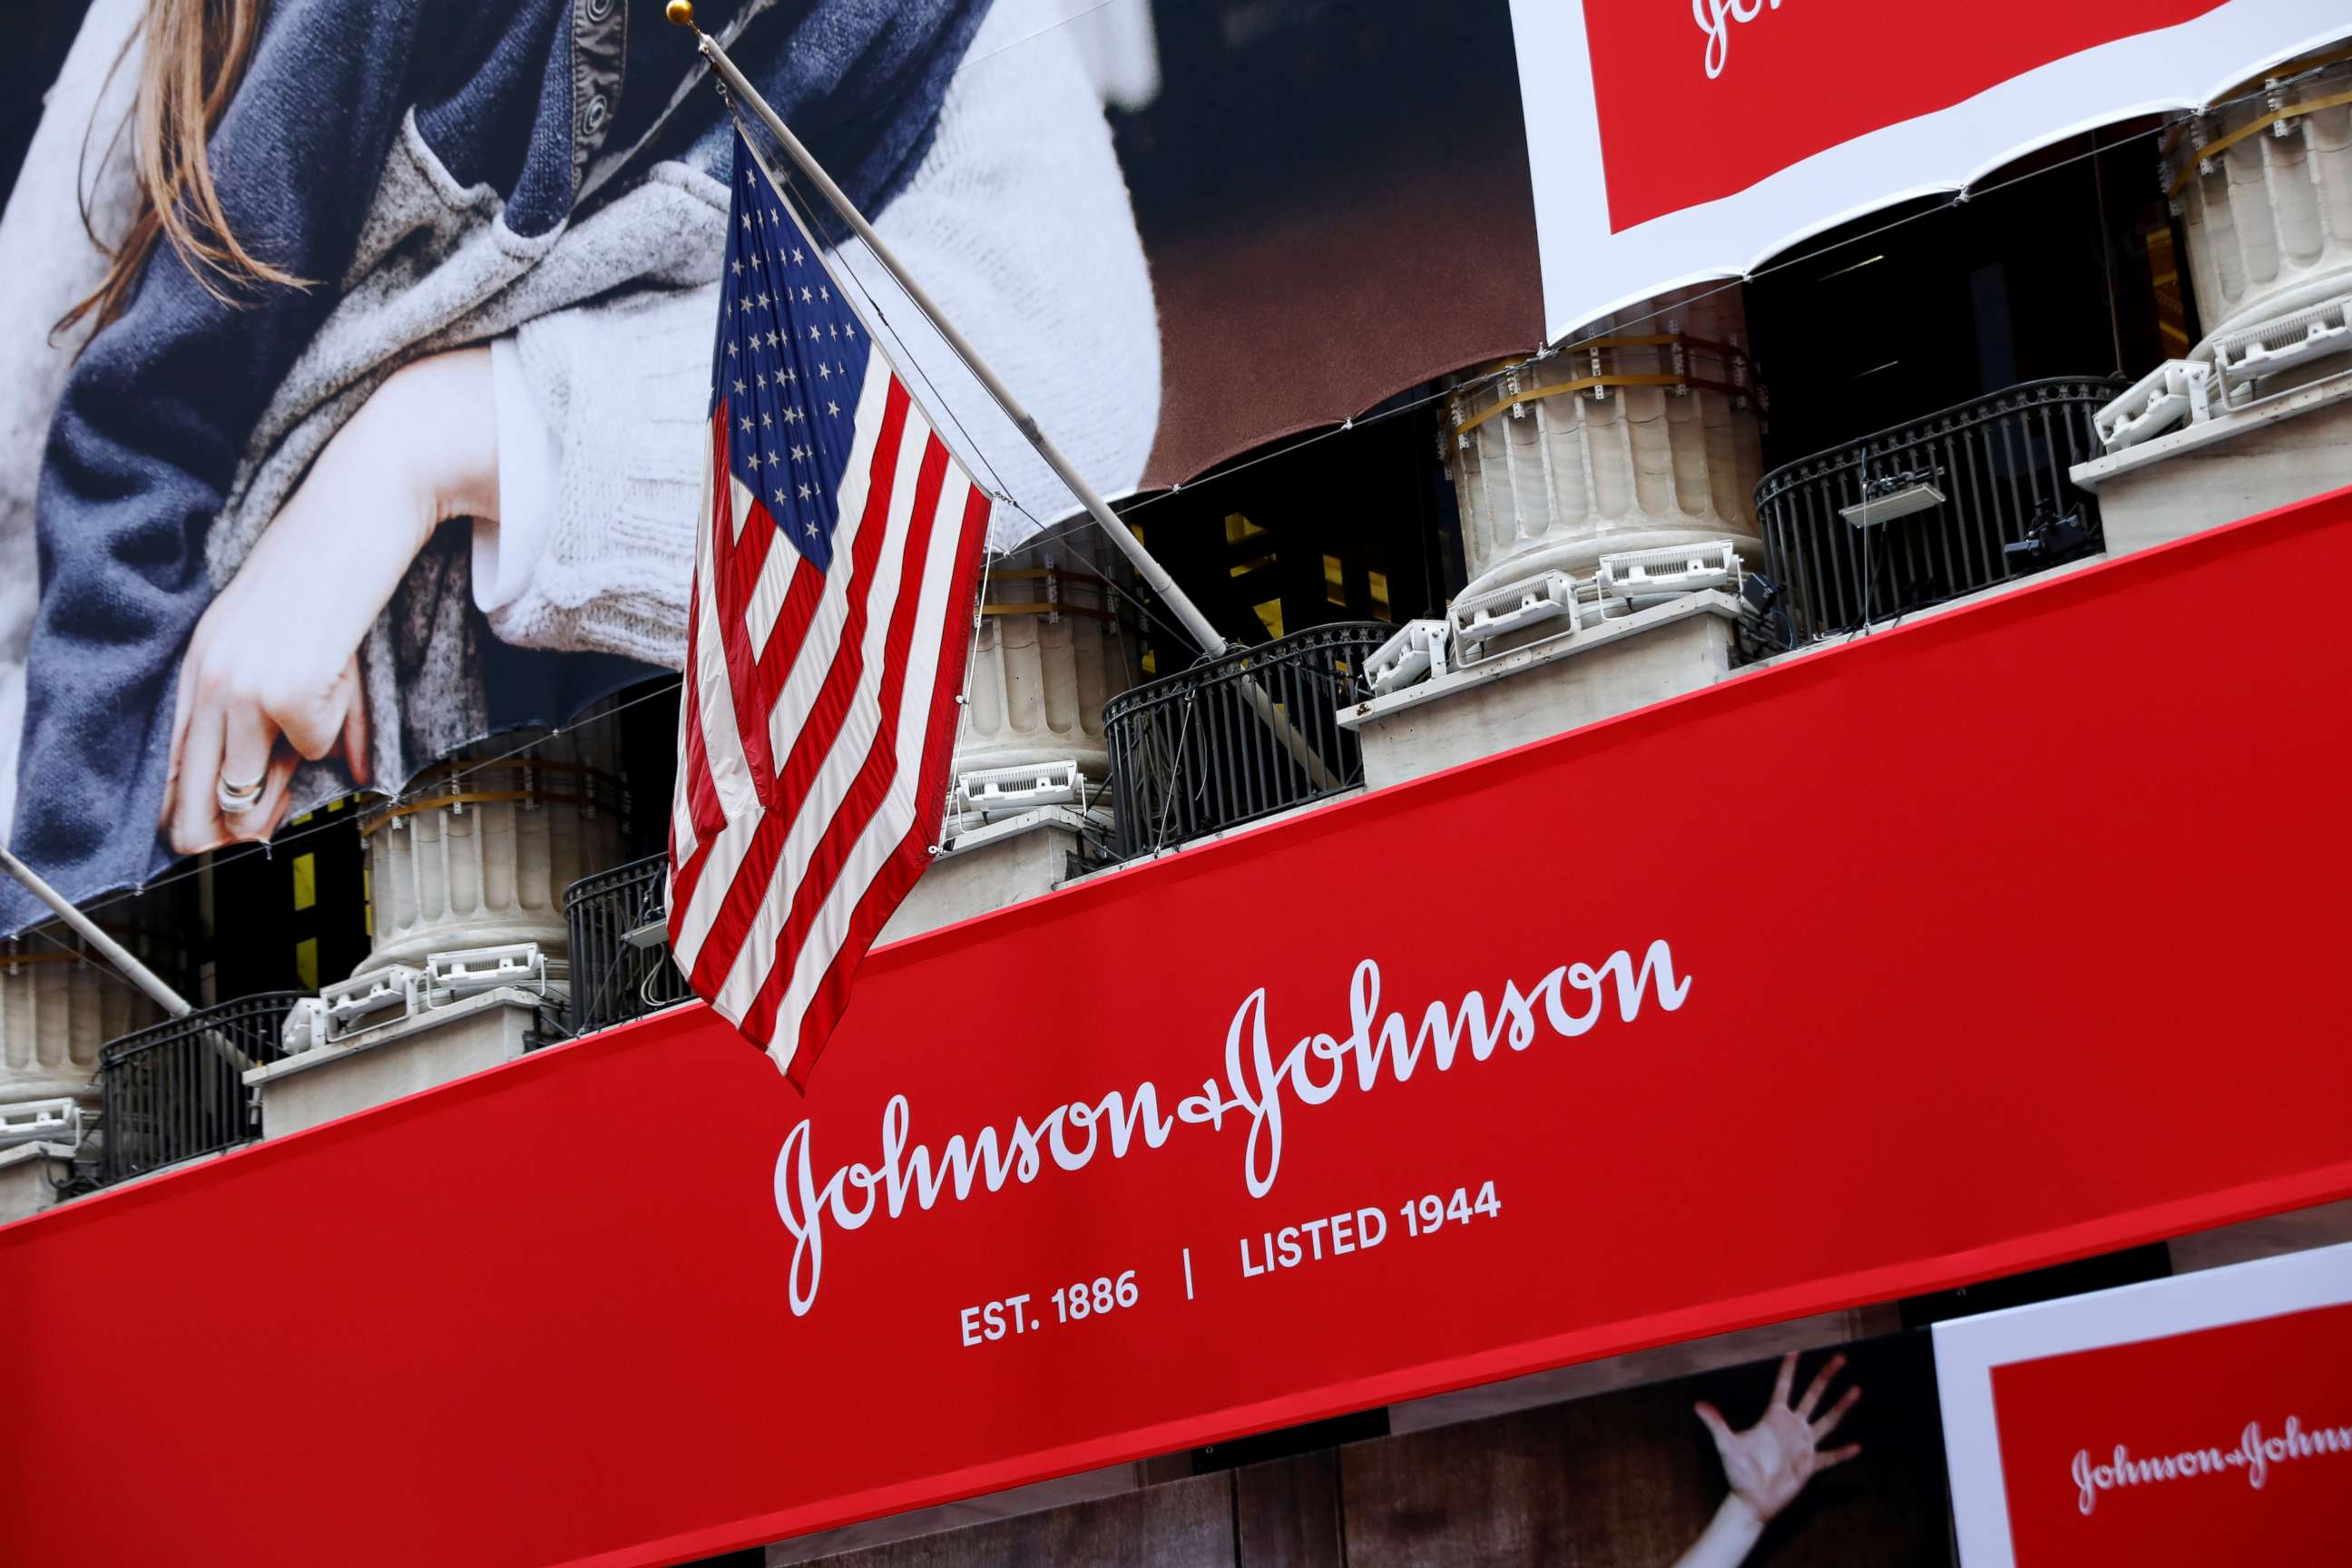 PHOTO: The U.S. flag is seen over the company logo for Johnson & Johnson to celebrate the 75th anniversary of the company's listing at the New York Stock Exchange (NYSE).